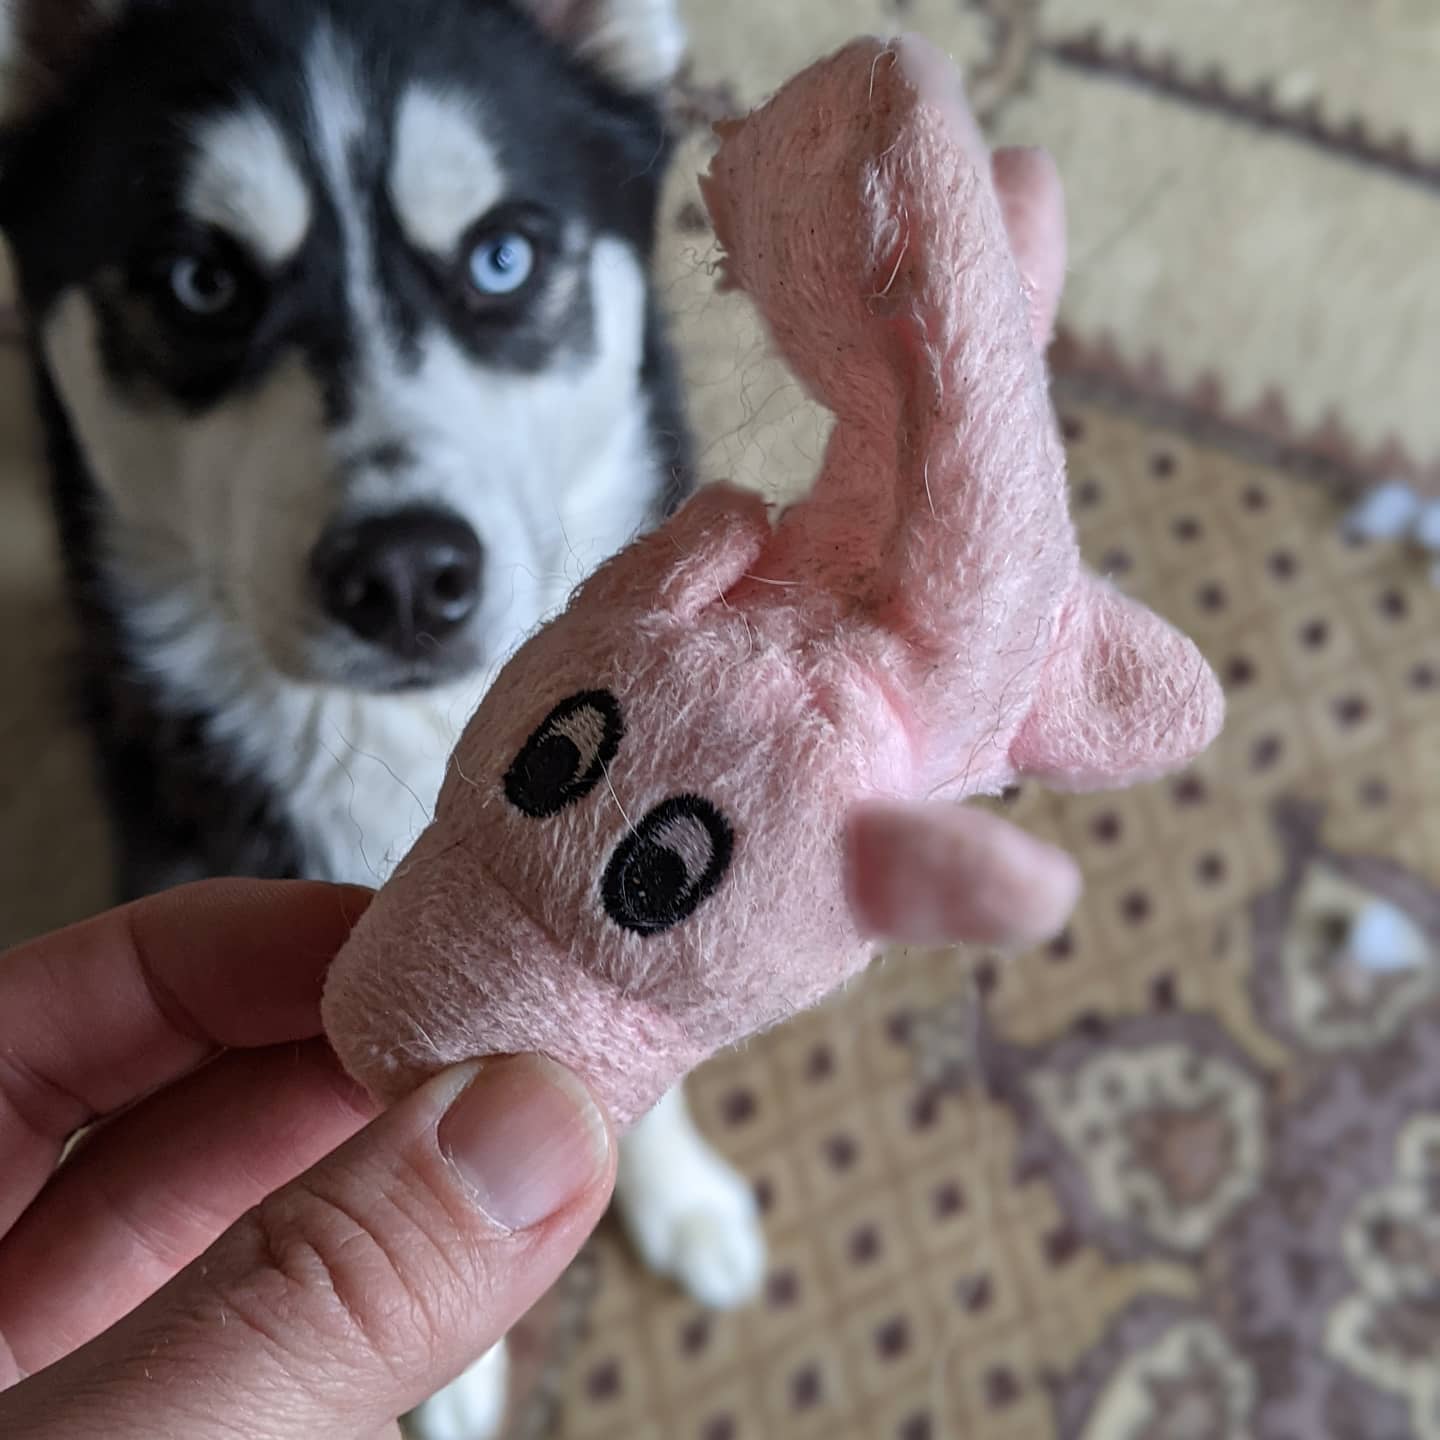 This little piggy went to heaven... #stlnanuq #huskiesofinstagram #siberianhusky The word "eviscerated" springs to mind.